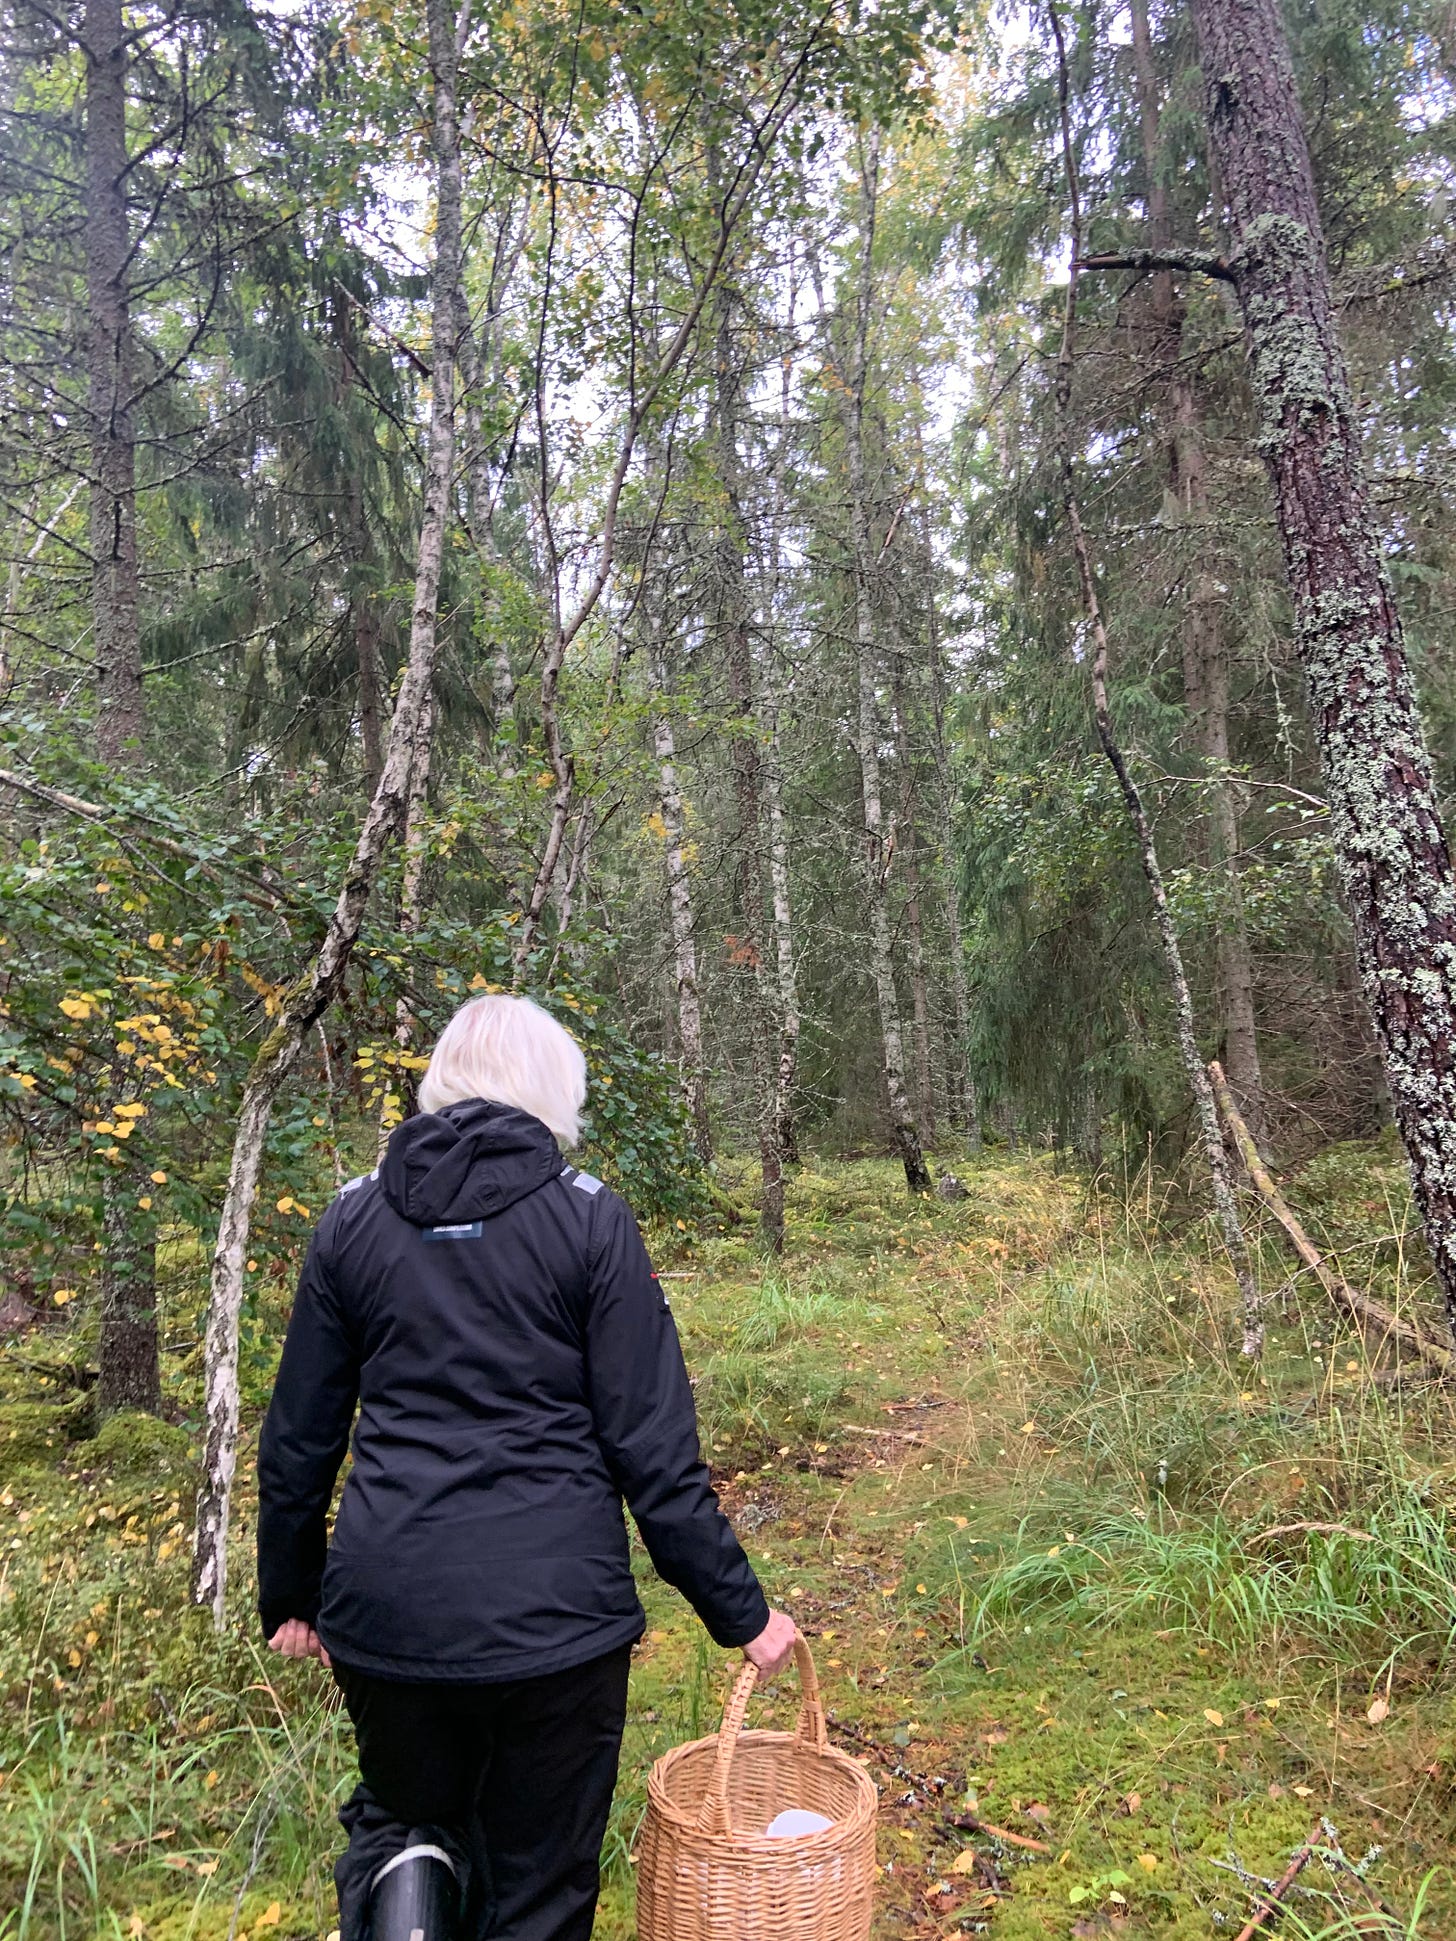 A woman with white hair, walks through the forest holding a wooden basket, searching for edible mushrooms